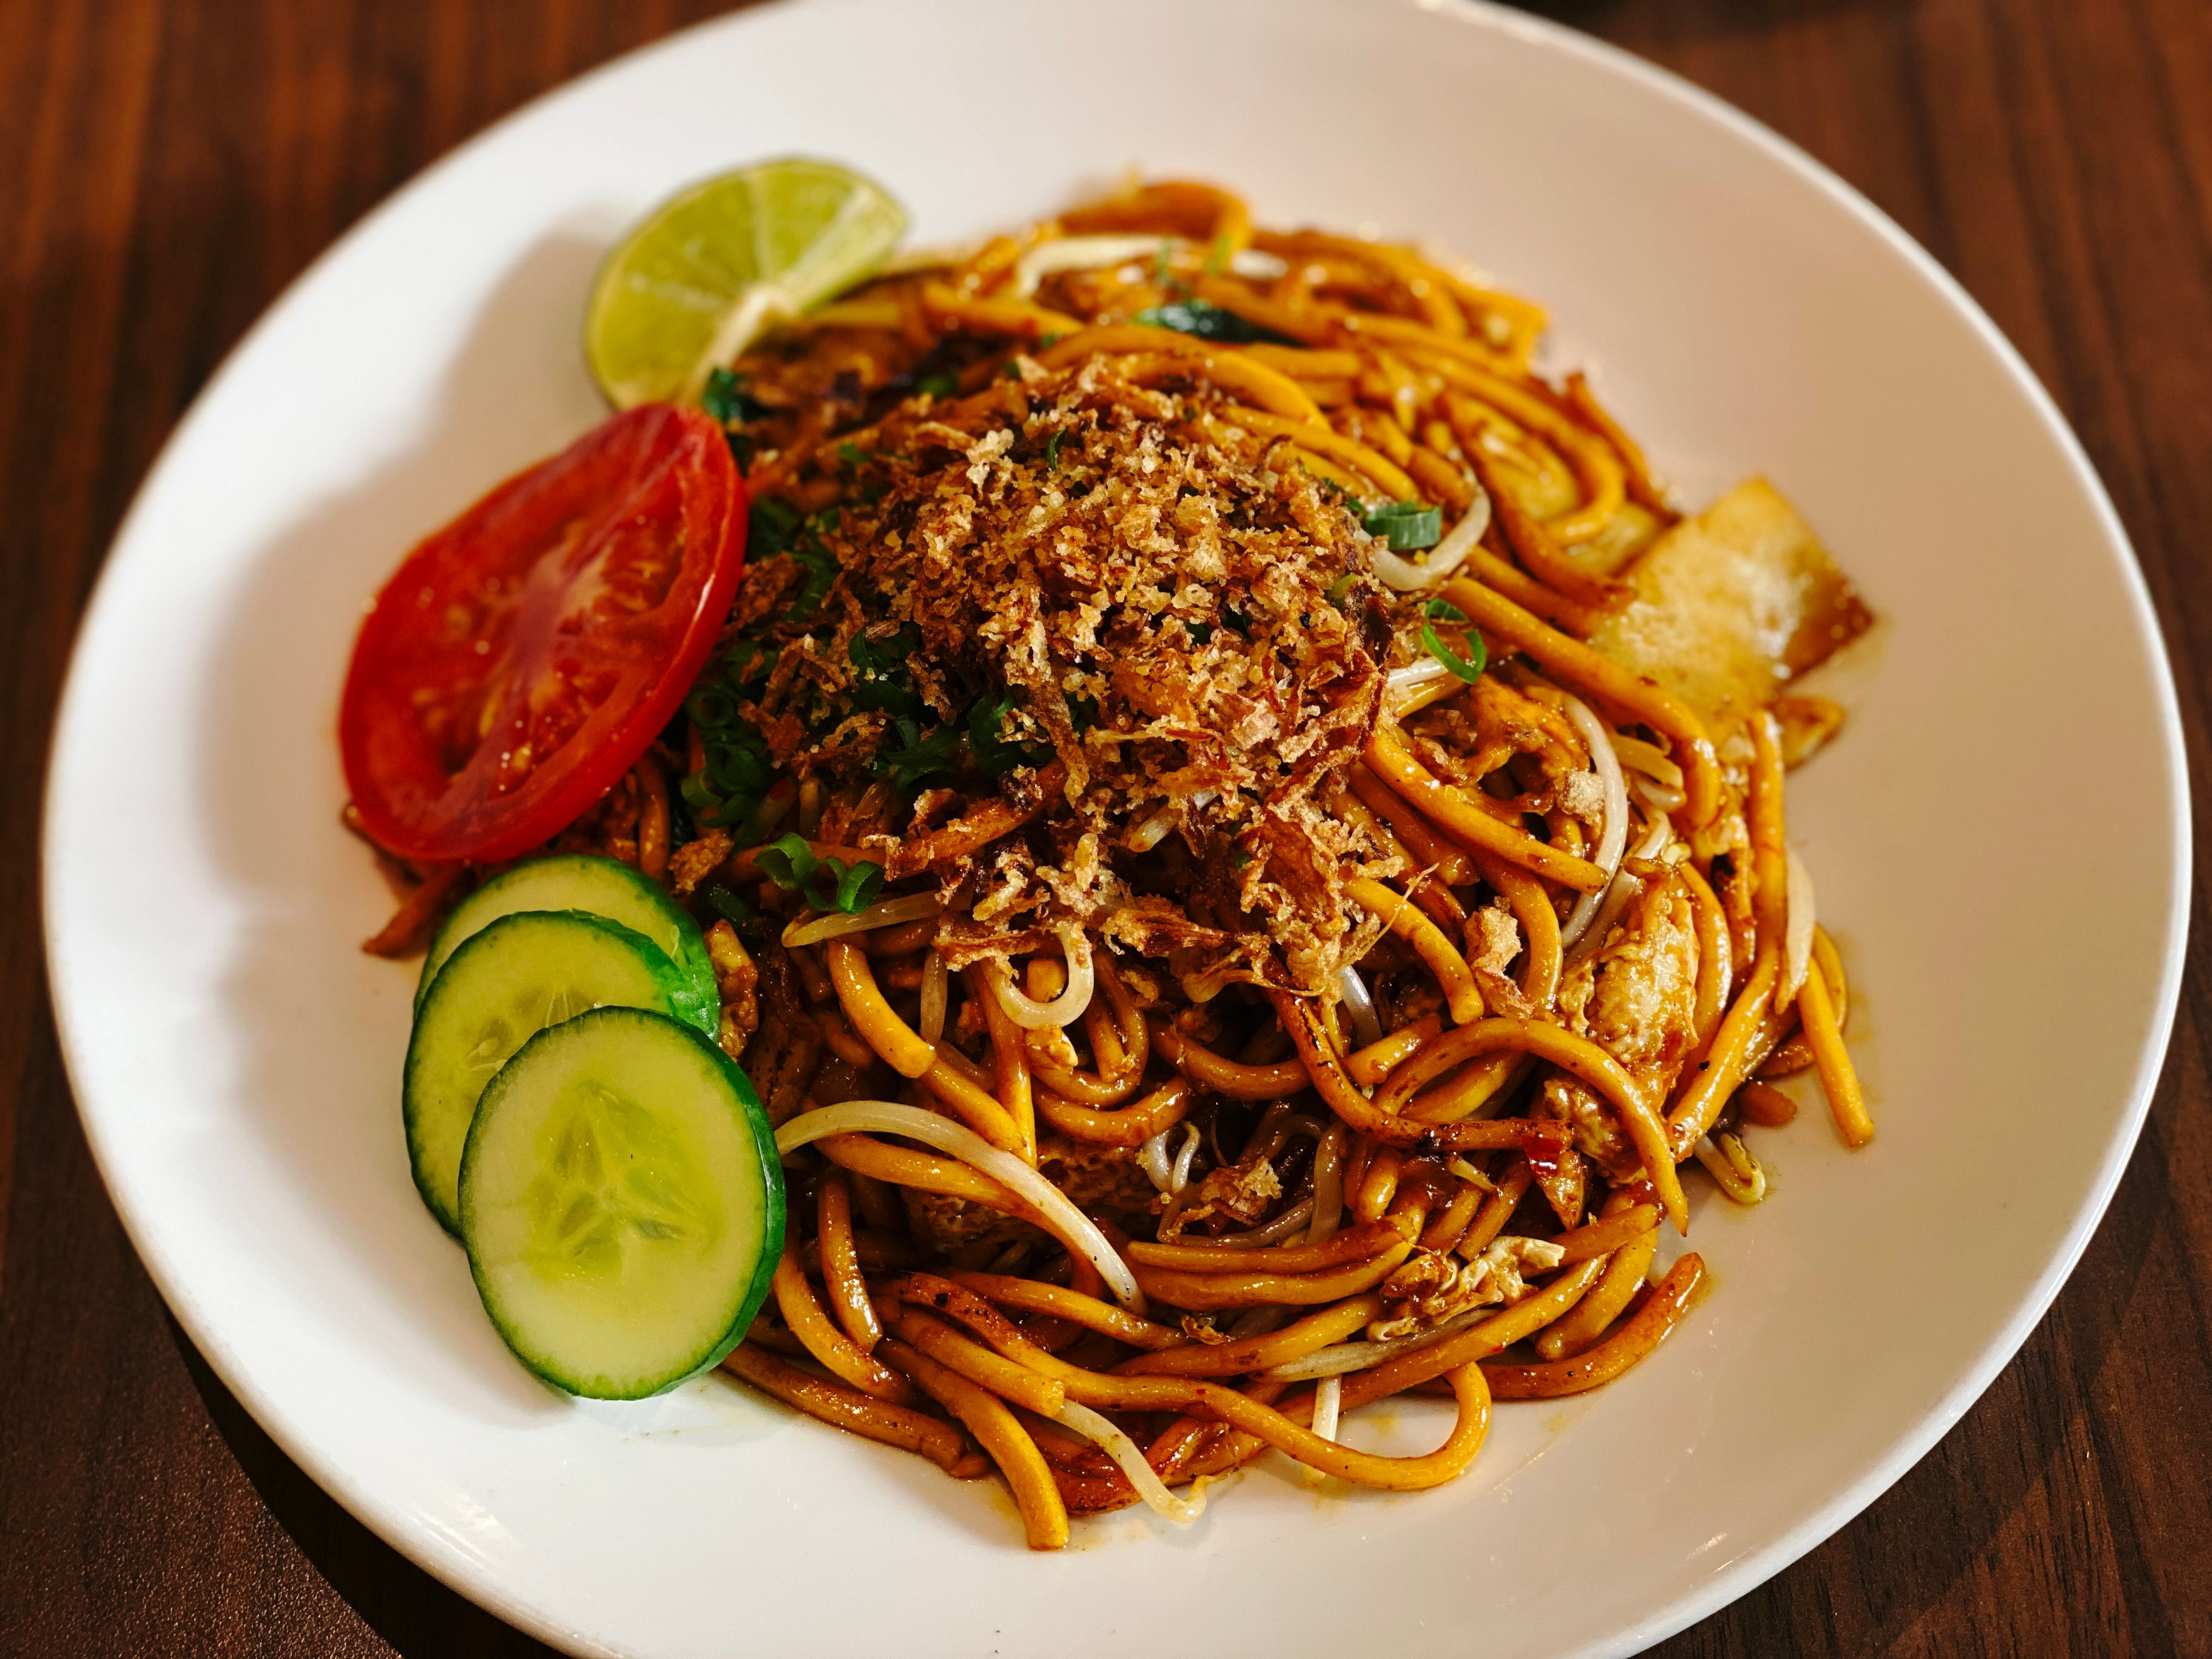 A photo of a plate of mee goreng, with a slice of tomato, lime, and three slices of cucumber next to it.